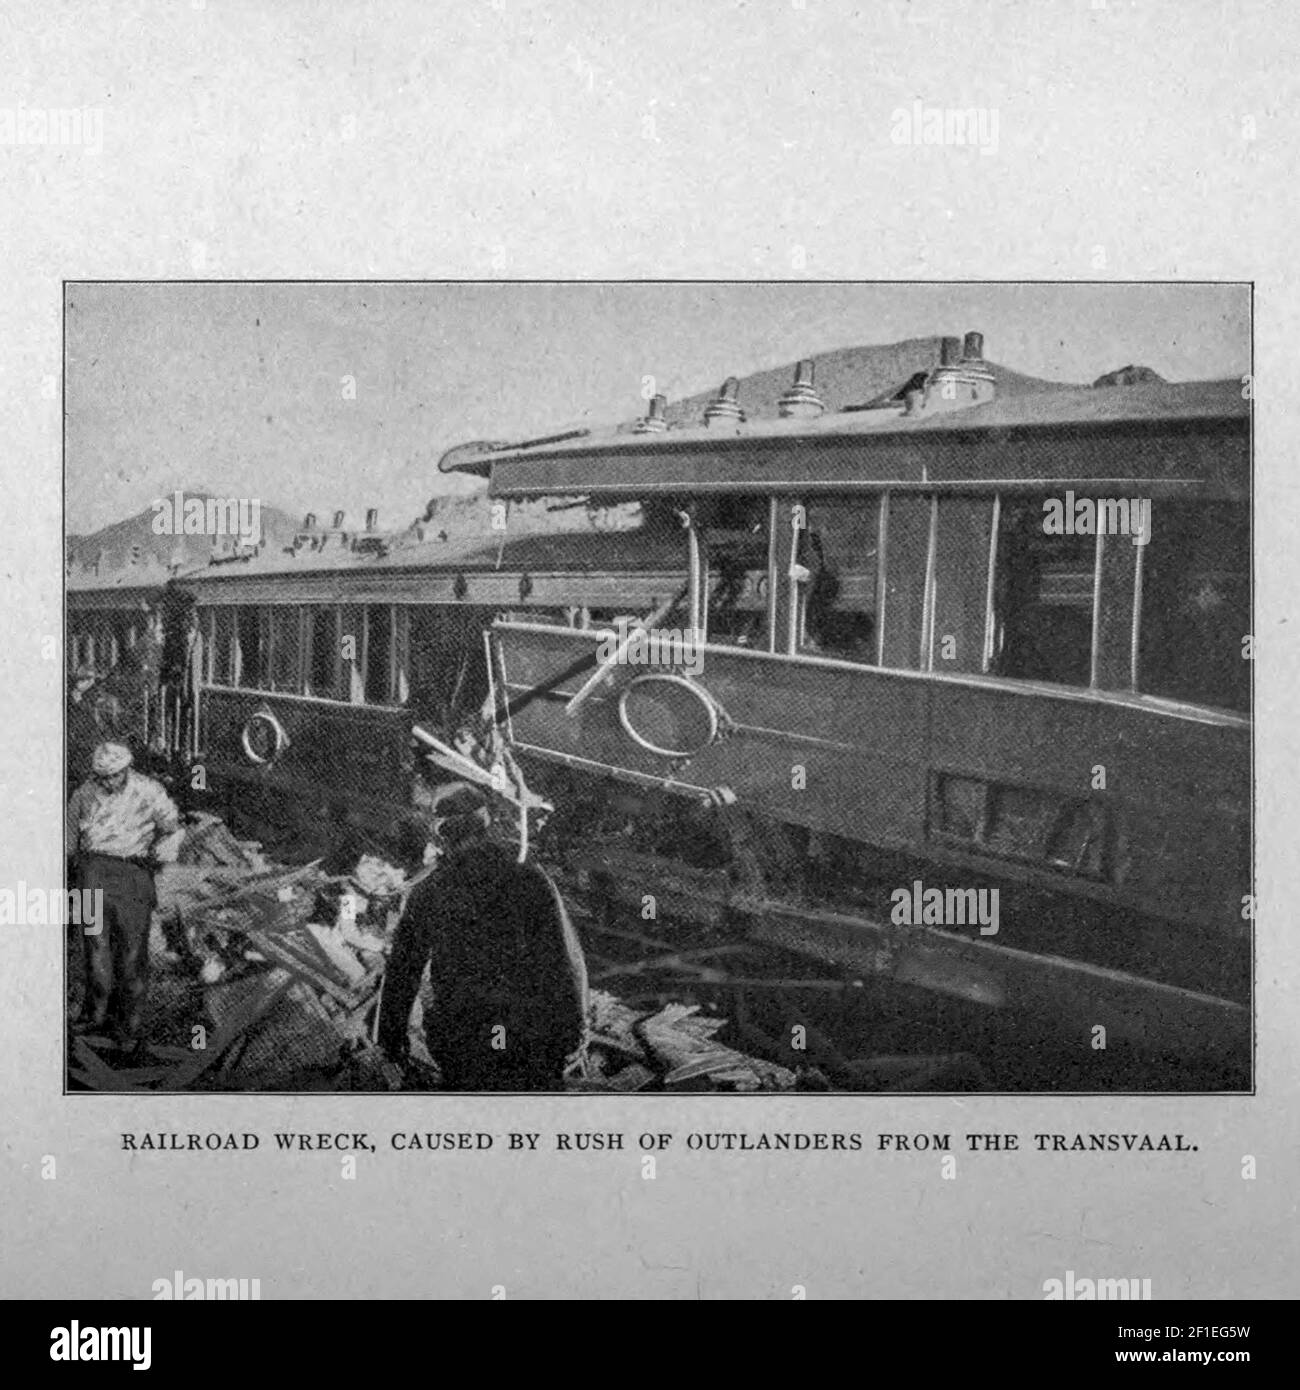 Railroad wreck caused by the Rush of Outlanders from the Transvaal from the book ' Boer and Britisher in South Africa; a history of the Boer-British war and the wars for United South Africa, together with biographies of the great men who made the history of South Africa ' By Neville, John Ormond Published by Thompson & Thomas, Chicago, USA in 1900 Stock Photo